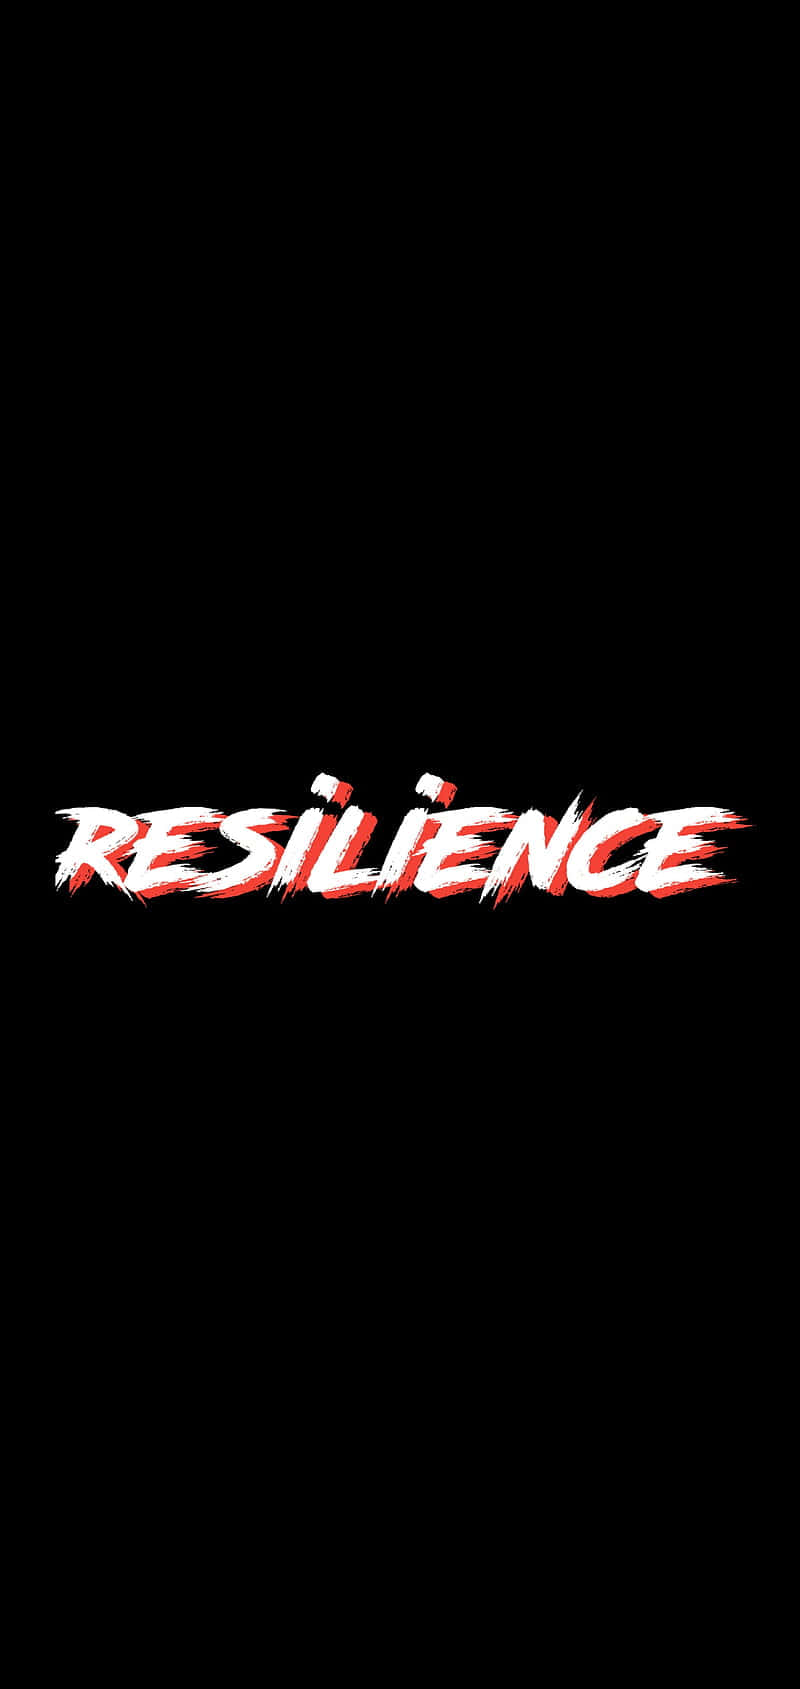 Reminder For People To Be Resilient In White With Red Text Wallpaper